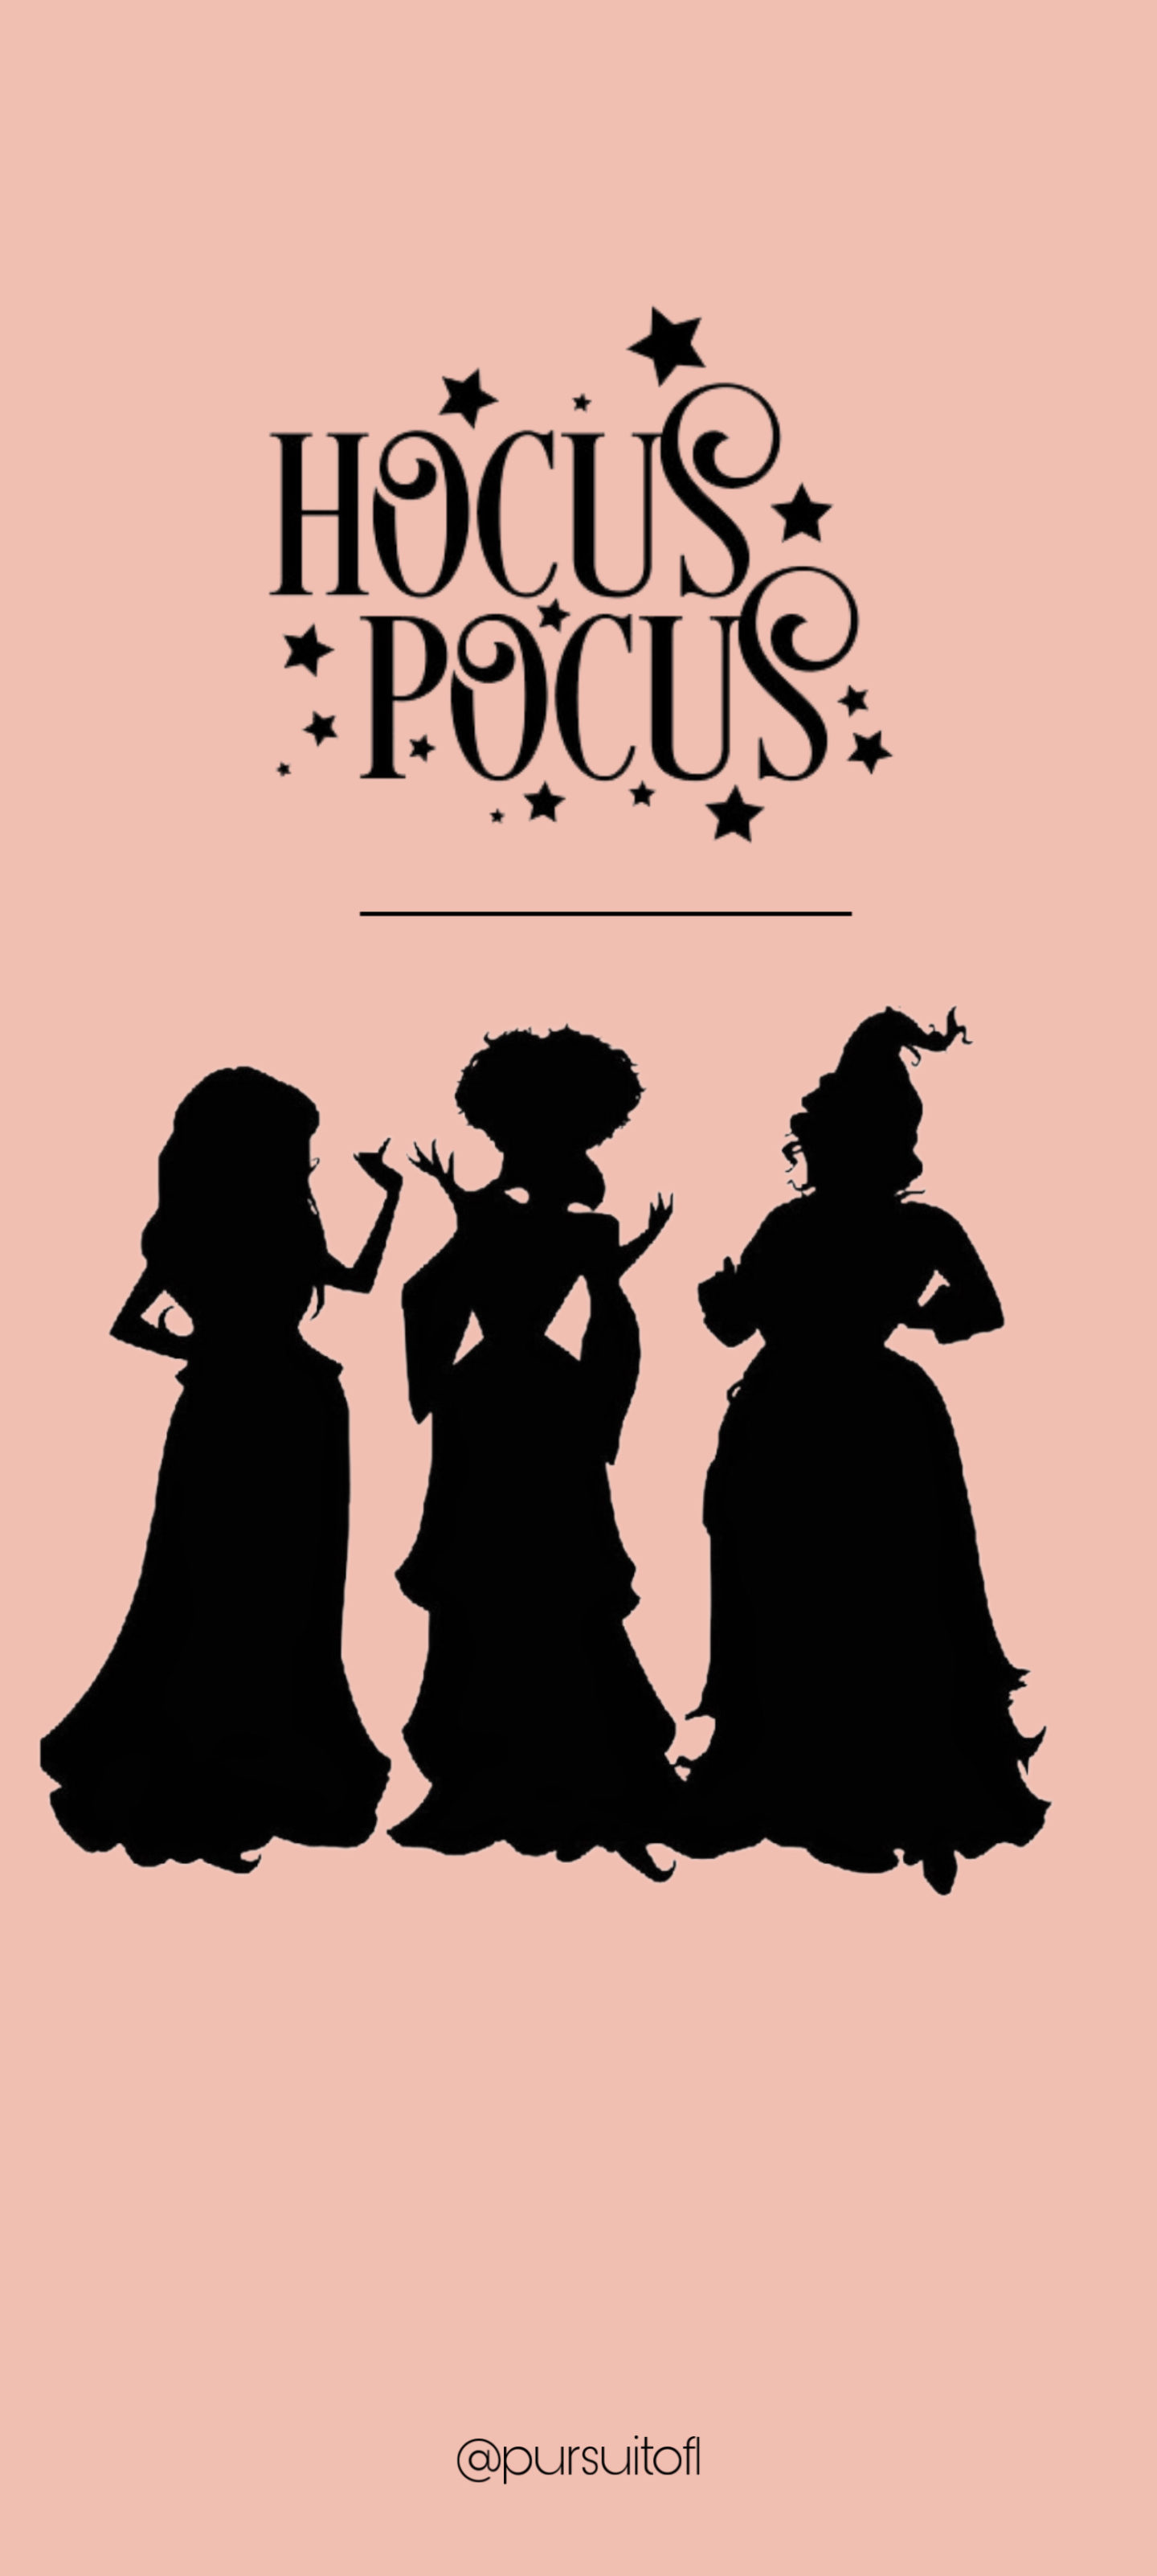 Light Orange Hocus Pocus Phone Wallpaper with Winnifred, Sarah, and Mary Witch Silhouettes